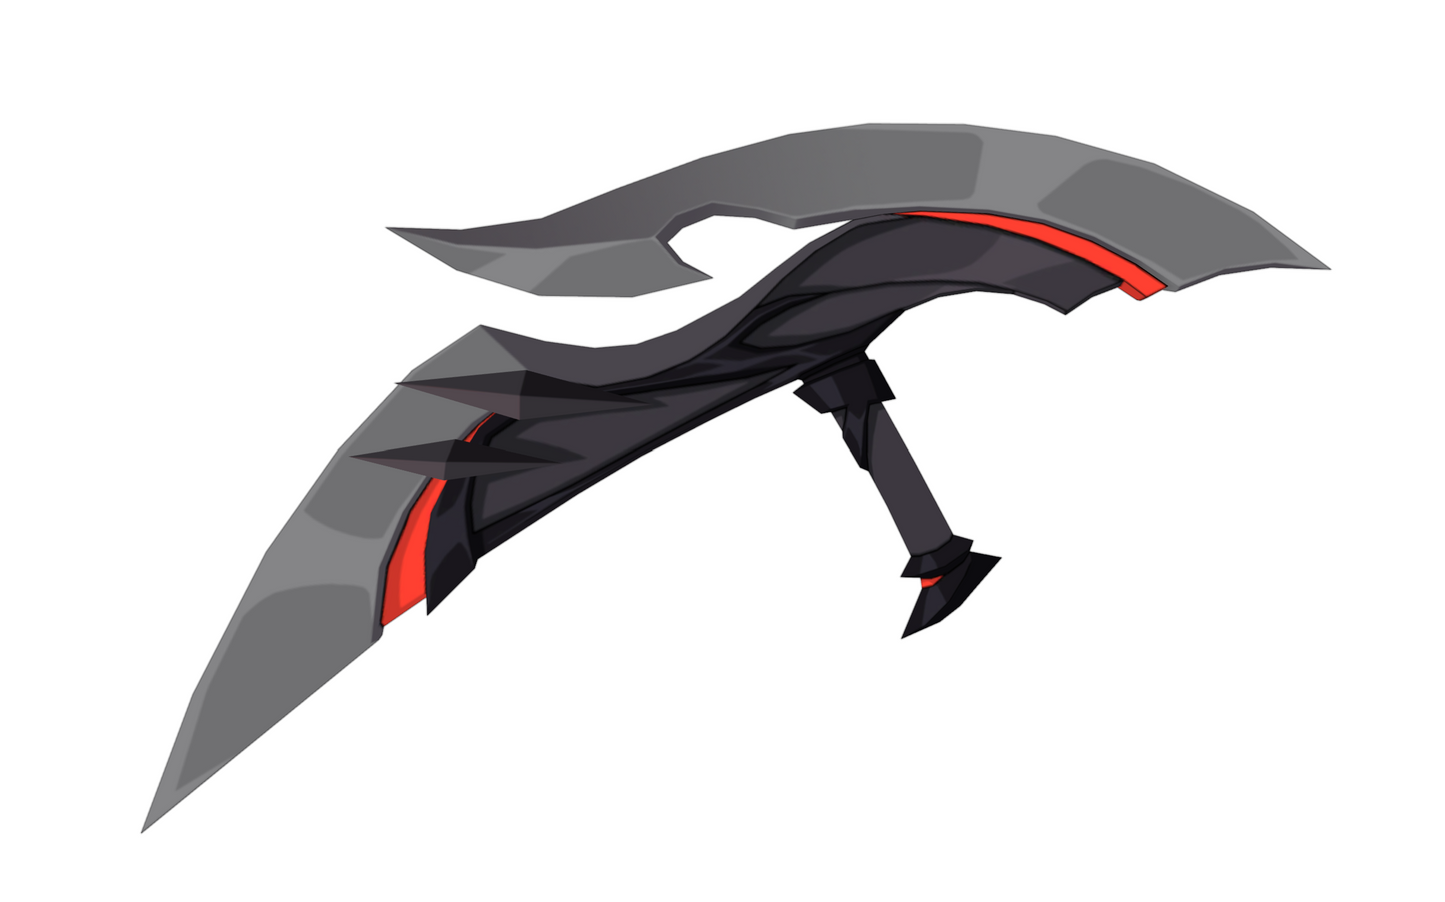 Fatui Pyro Agent Sacrificial Knife - Digital 3D Model Files and Physical 3D Printed Kit Options - Fatui Pyro Agent Cosplay